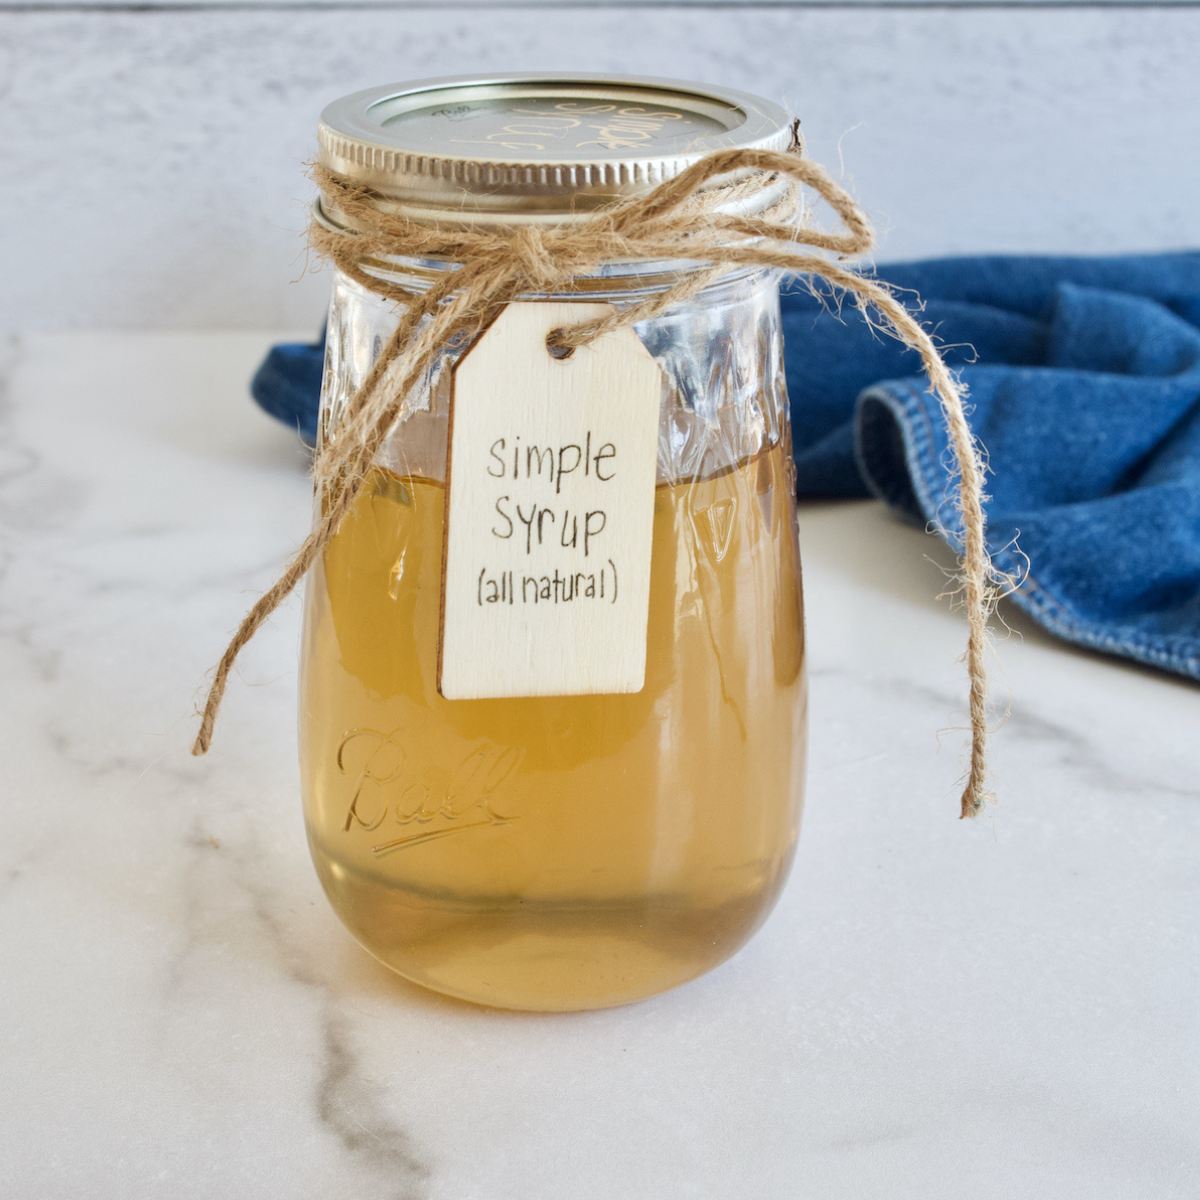 Jar of golden liquid, Liquid cane sugar simple syrup tied with bow with a name tag.